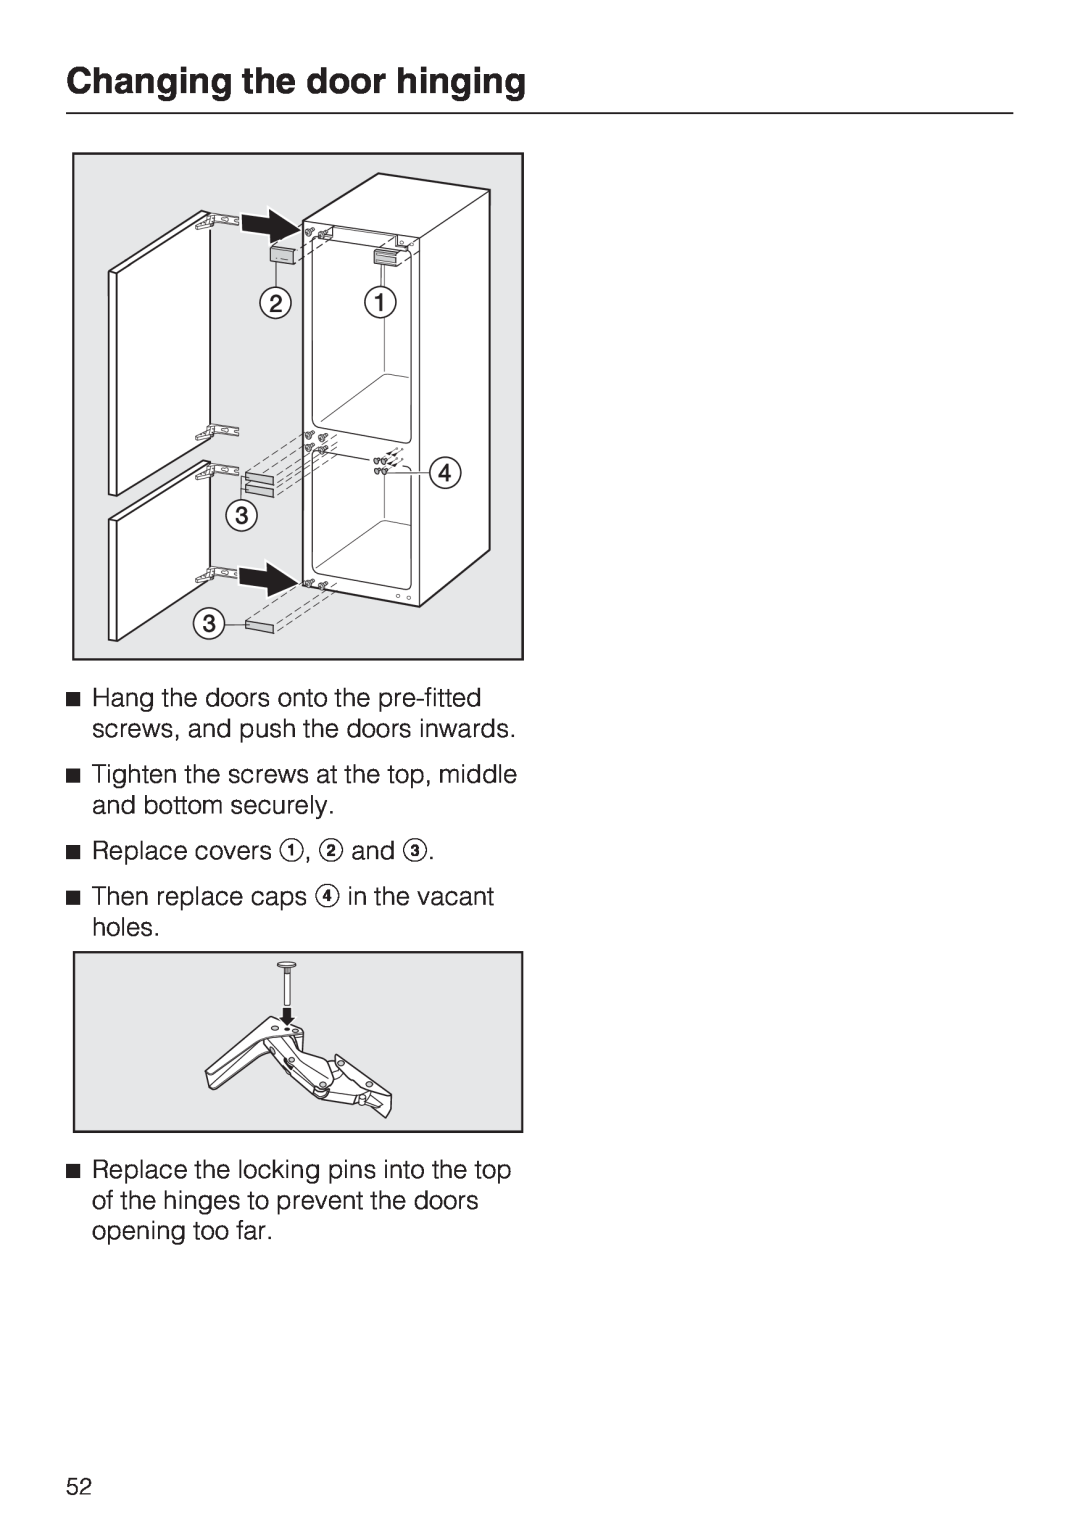 Miele KF 9757 ID installation instructions Changing the door hinging, Replace covers a, b and c 